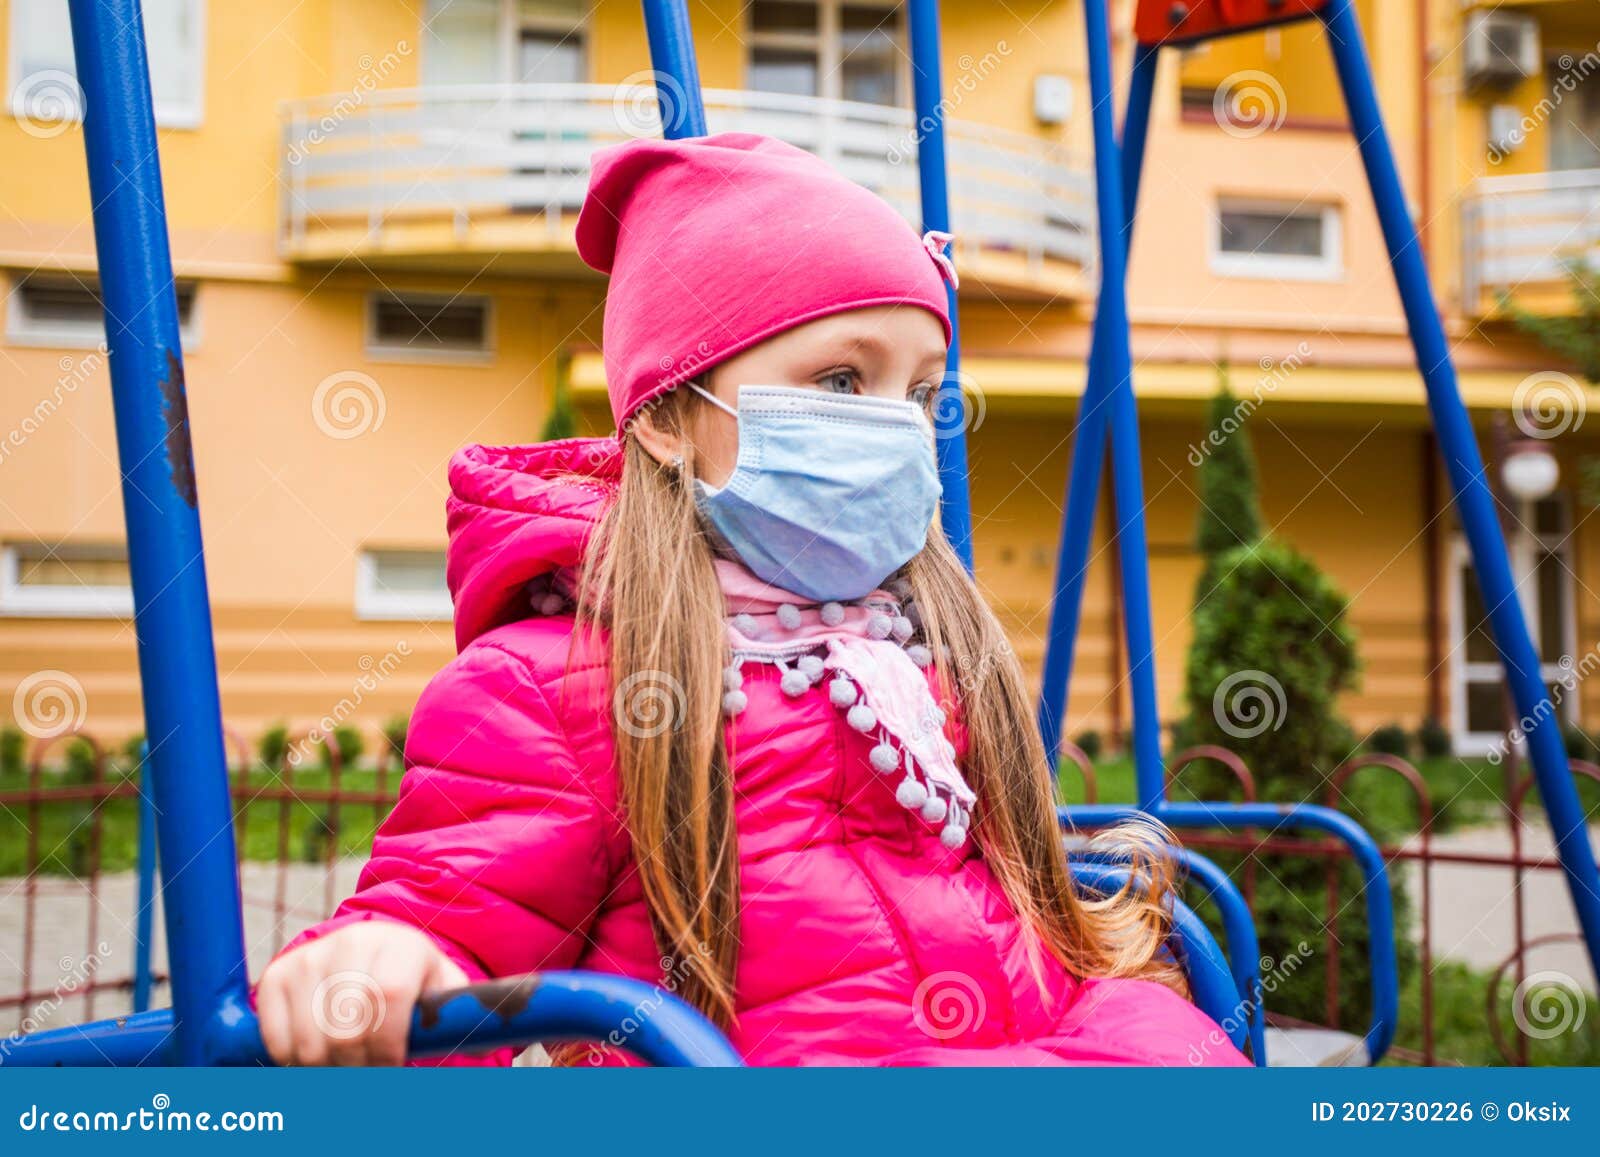 The Sad Girl is Forced To Play without Friends during Quarantin pic